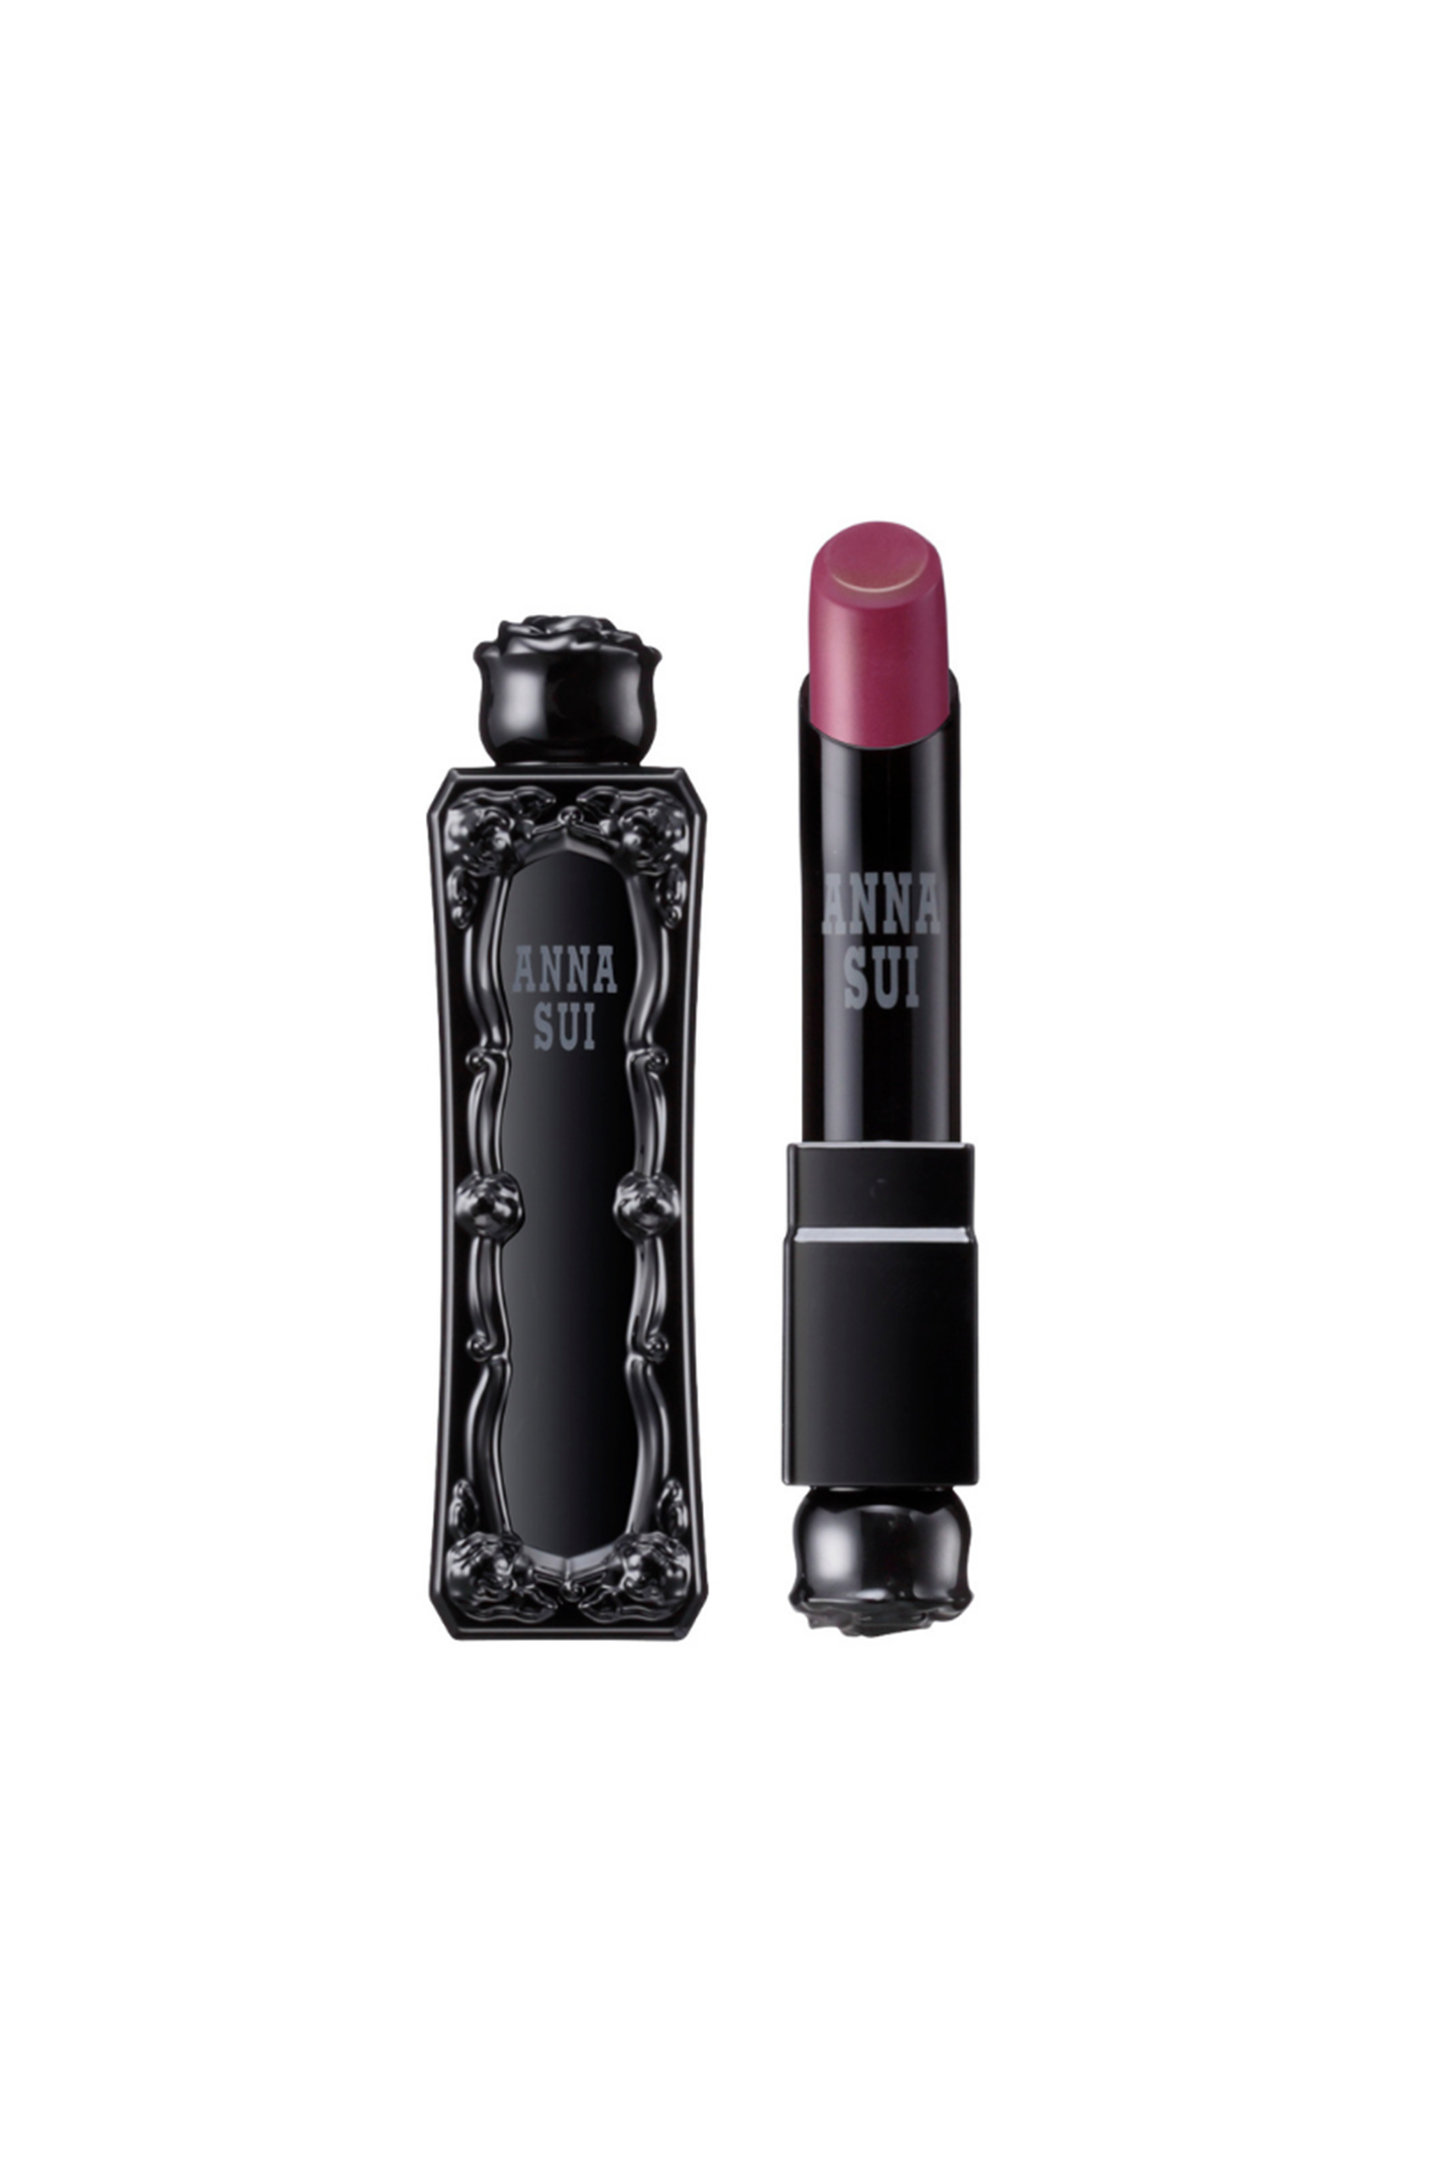 Mulberry Pink lipstick, in an Anna Sui, black container with raised rose pattern, rose on top 